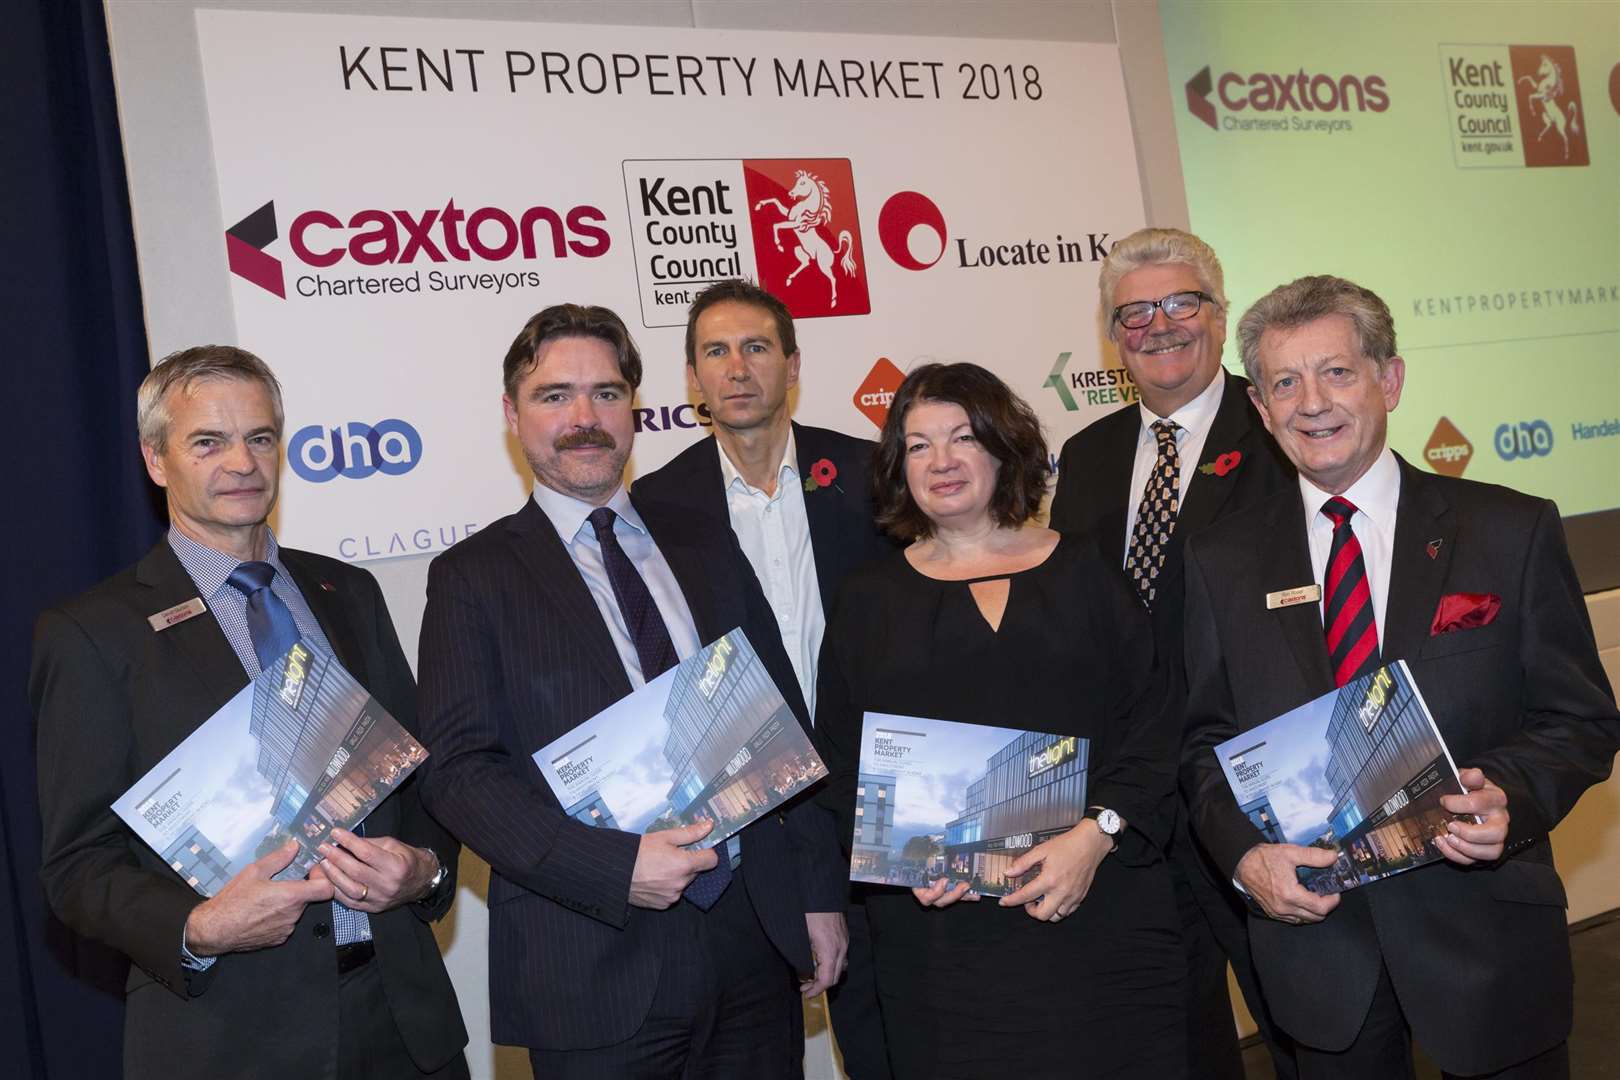 The Kent Property Market Report 2018 is launched (5147774)